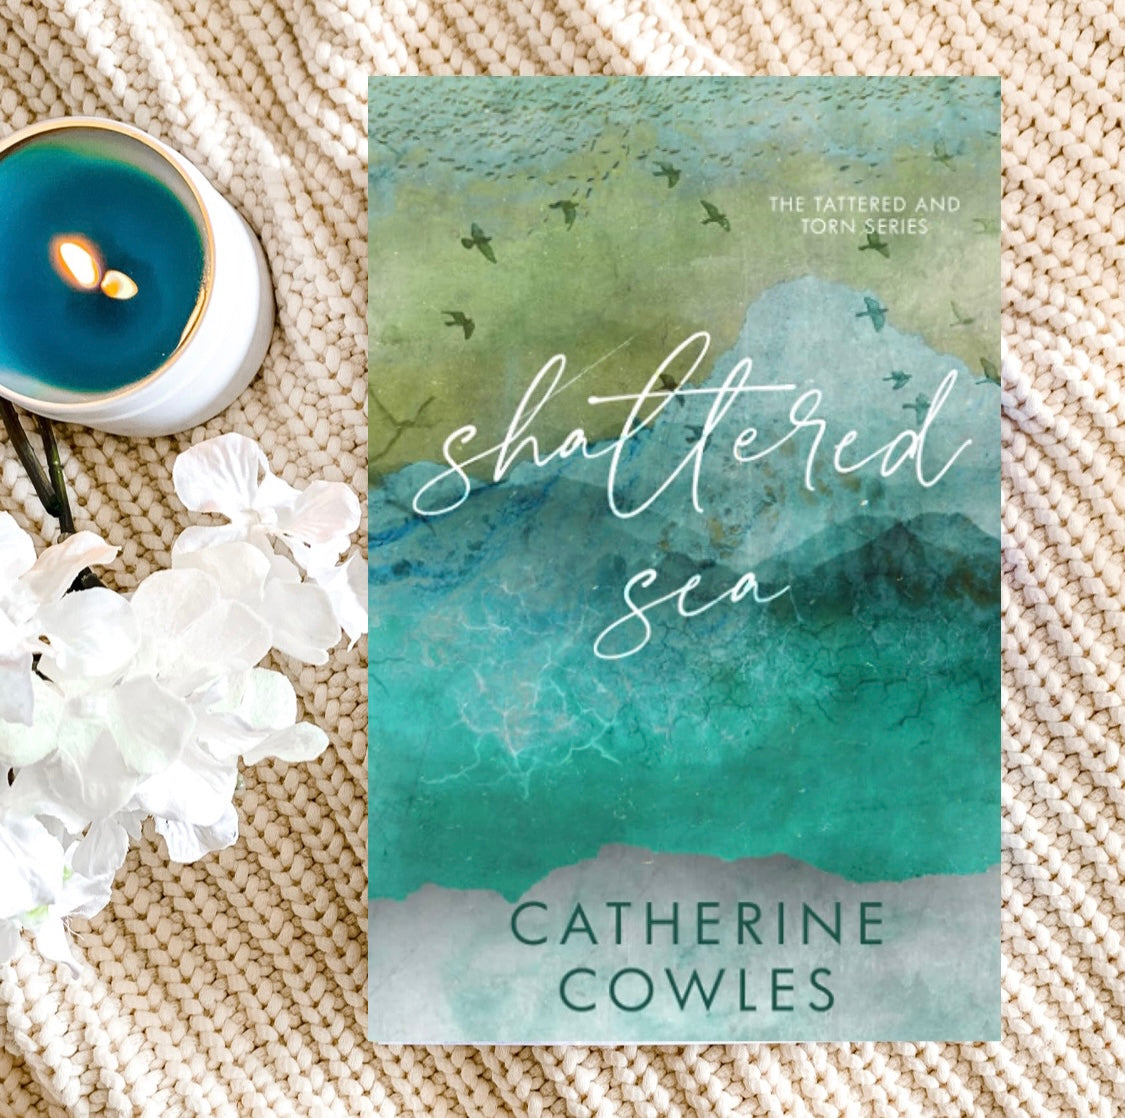 The Tattered & Torn Special Editions by Catherine Cowles